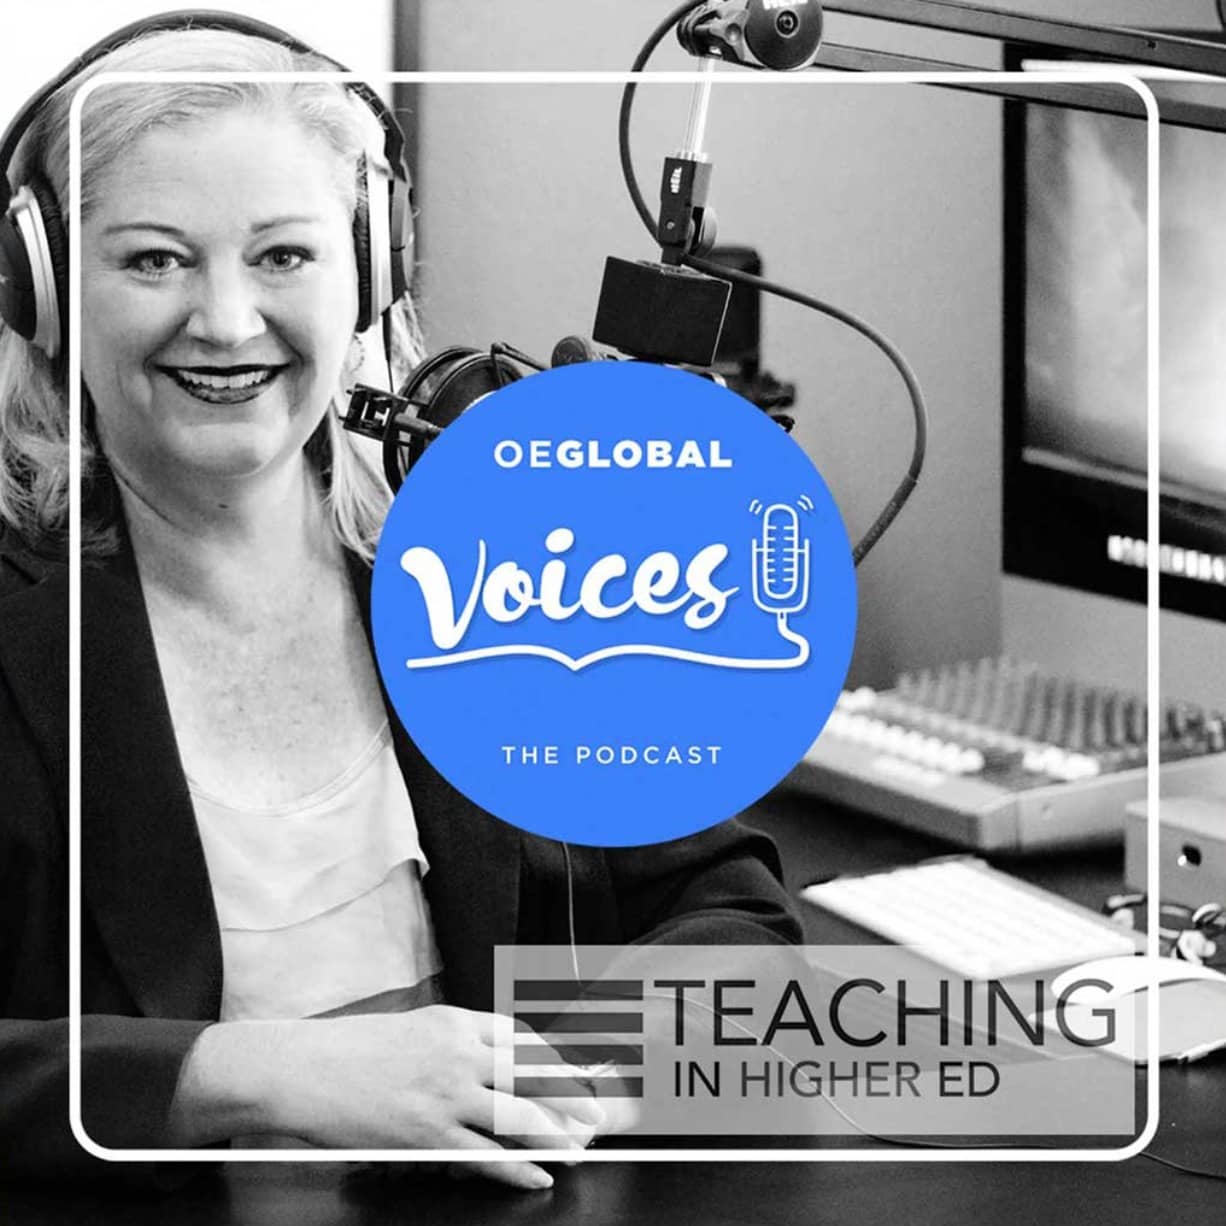 Bonni wears podcast headphones with the OEGlobal Voices podcast logo superimposed over top, along with the Teaching in Higher Ed logo